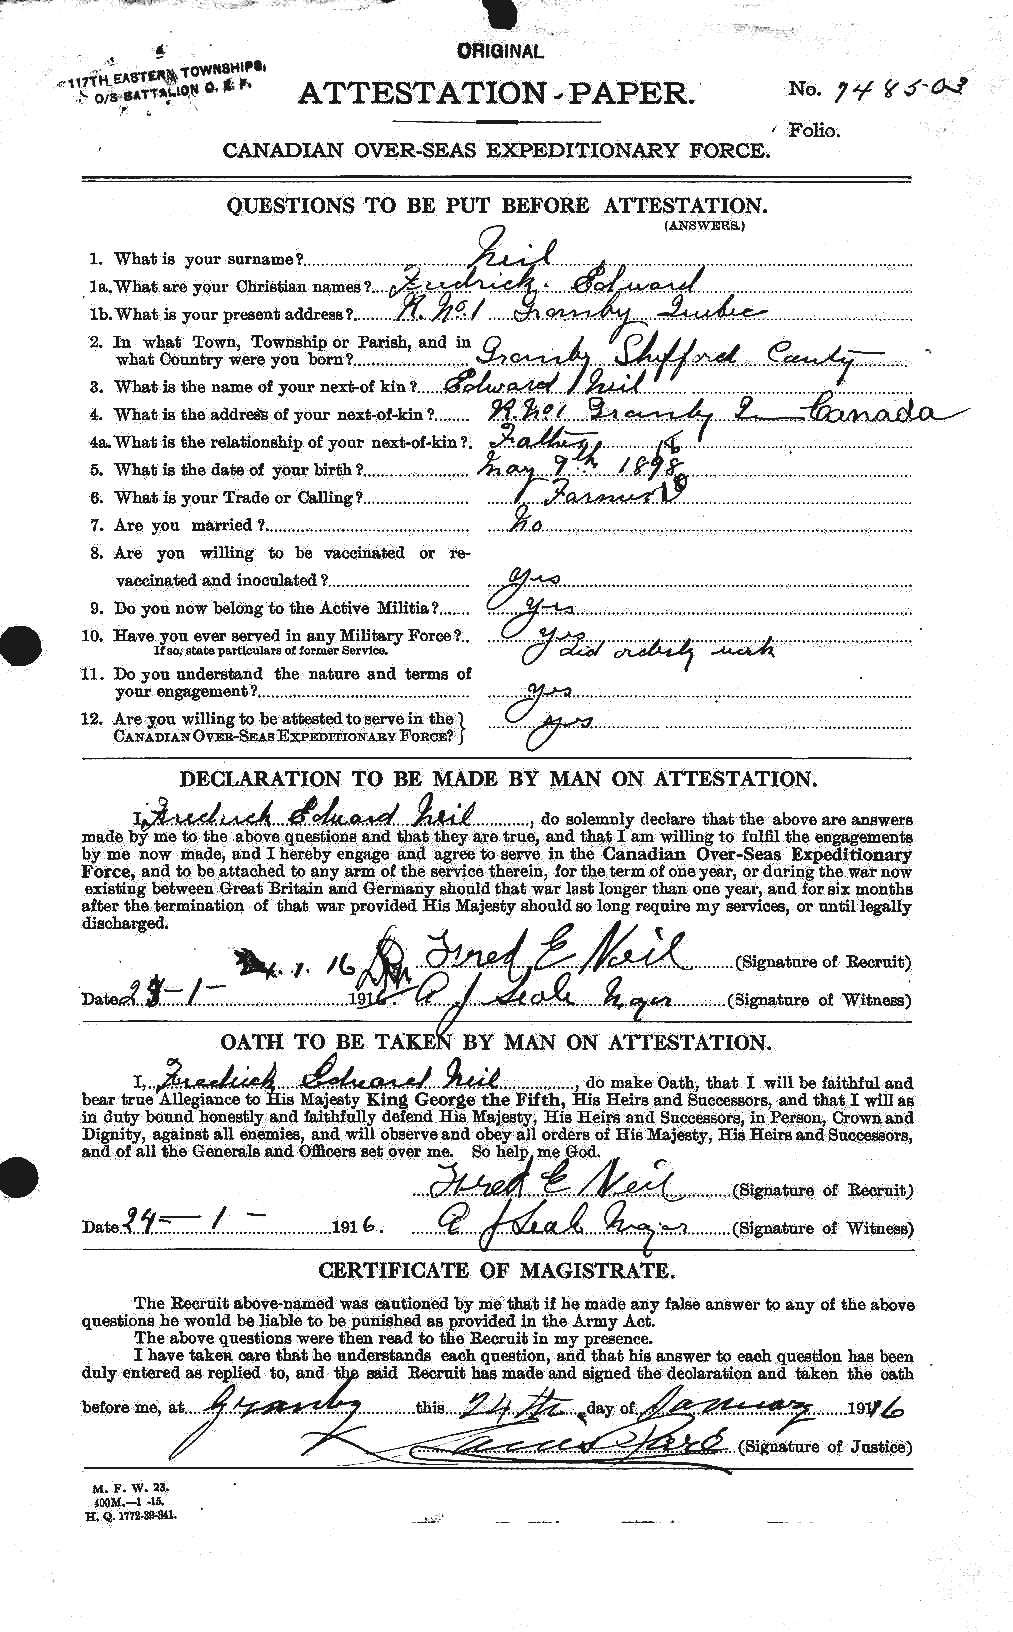 Personnel Records of the First World War - CEF 545574a